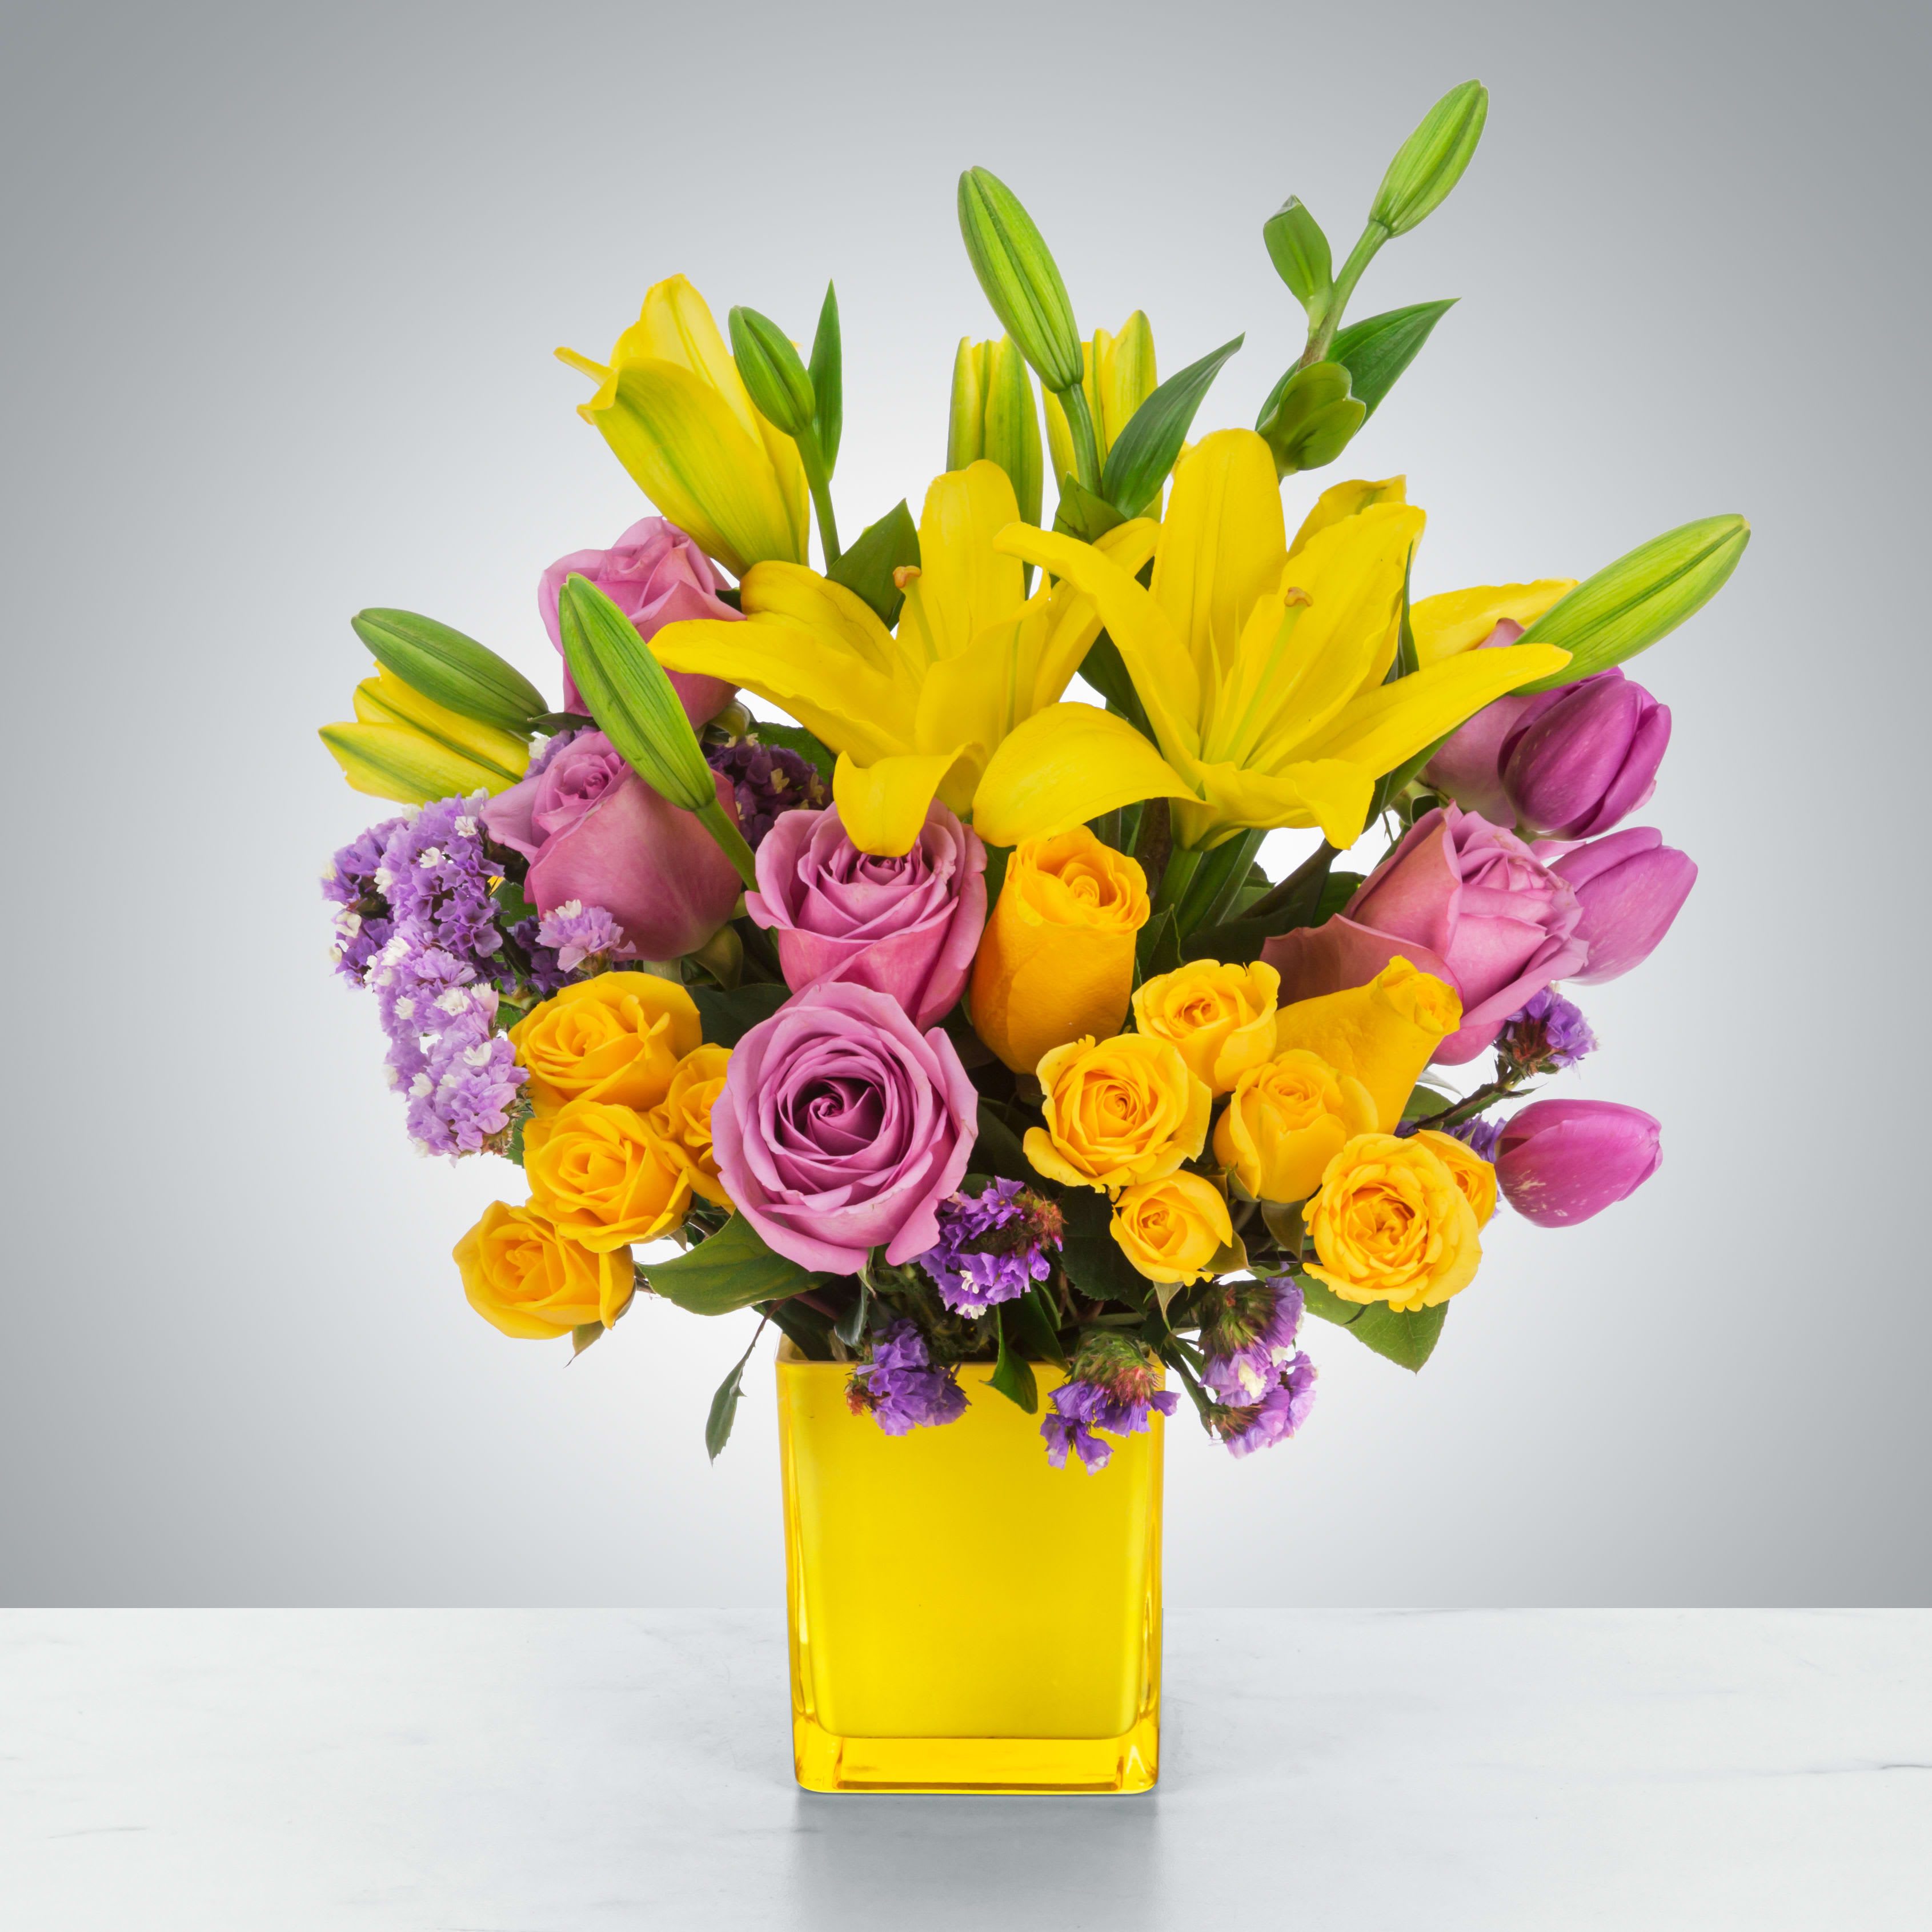 Sunday Afternoon by BloomNation™ - This arrangement is a sweet surprise for any recipient. Featuring a selection of yellow and purple flowers in a yellow vase, this arrangement is springtime in flower form and a great gift.   Approximate Dimensions: 13&quot;D x 16&quot;H